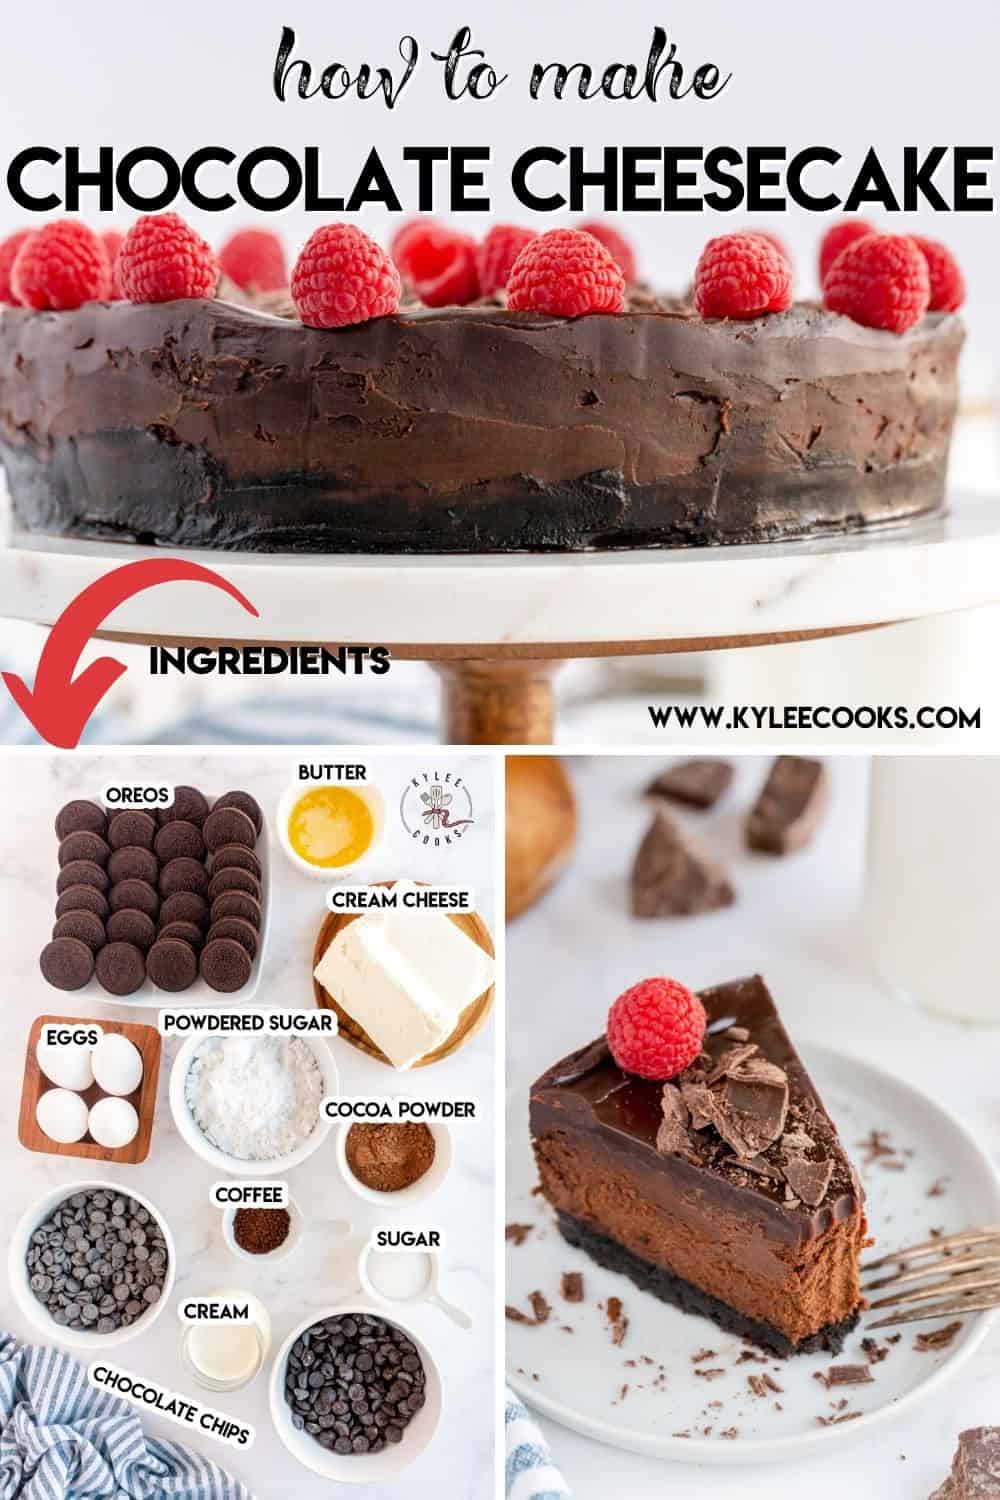 chocolate cheesecake sliced, with recipe name overlaid in text